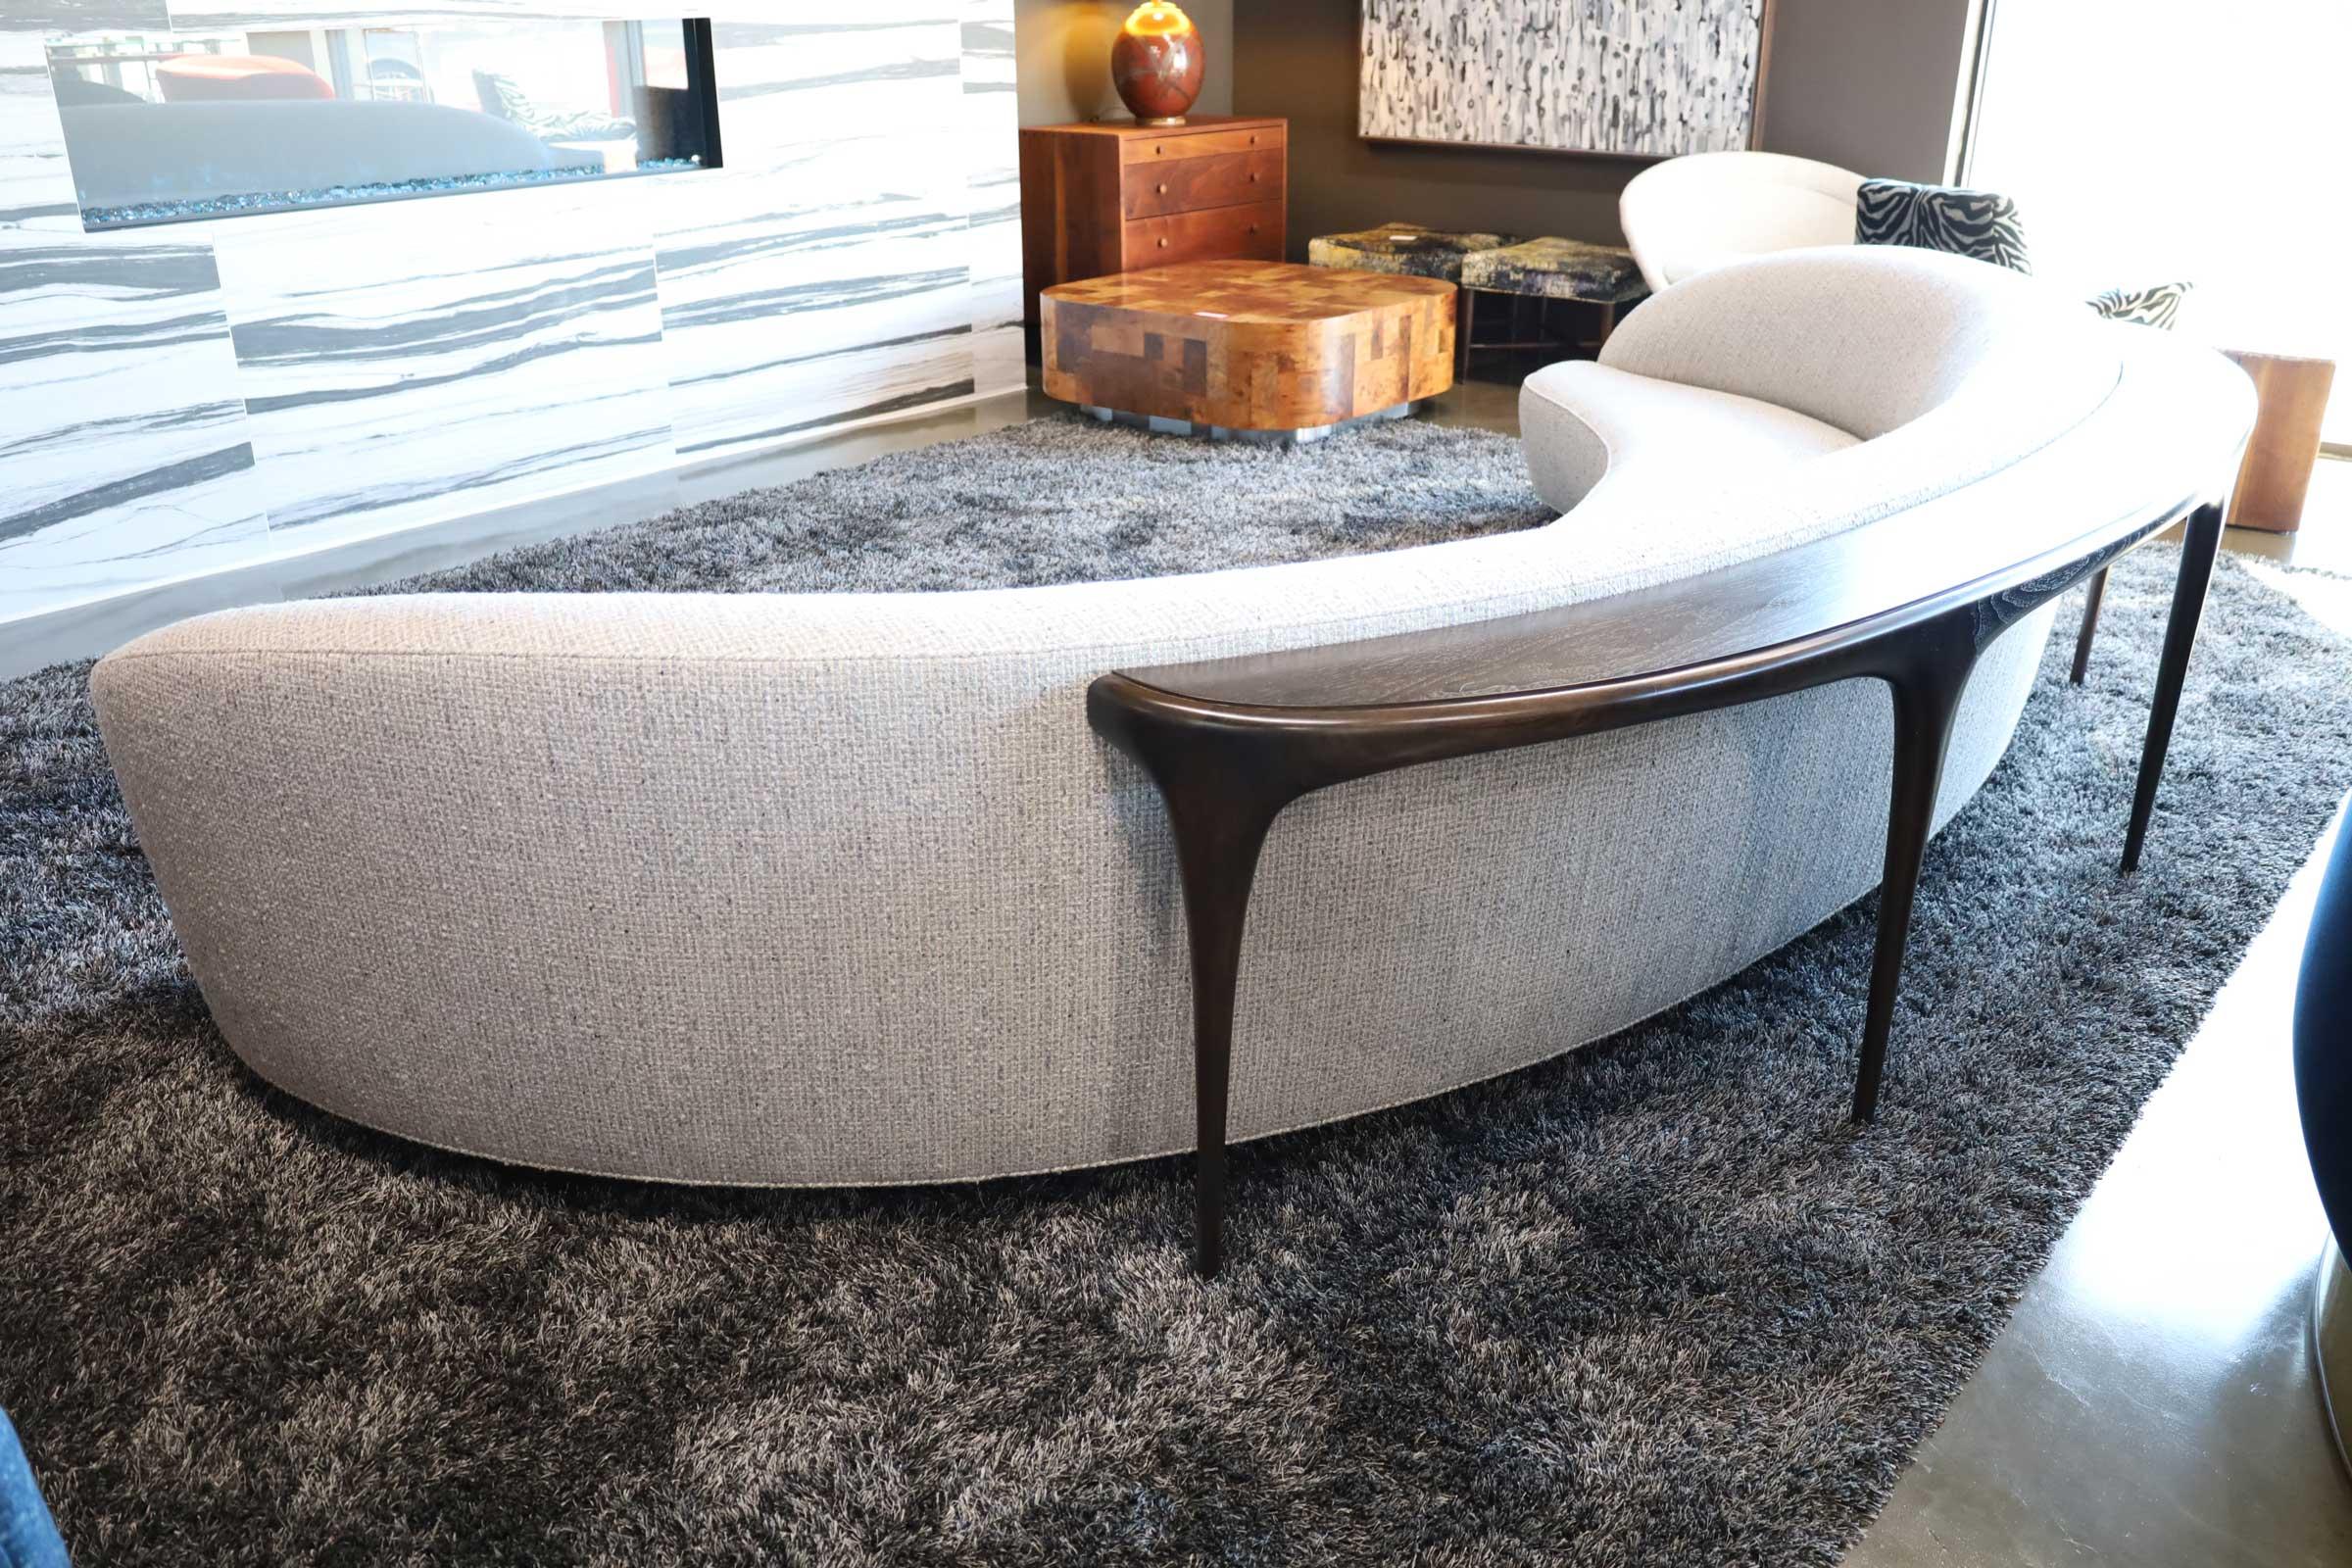 Beautiful custom made Vladimir Kagan Sloane sofa. Sofa measures 12' wide. Includes sculpted sofa table with four legs that attaches to the back of the sofa. Beautifully upholstered in a Holly Hunt great Plains fabric.